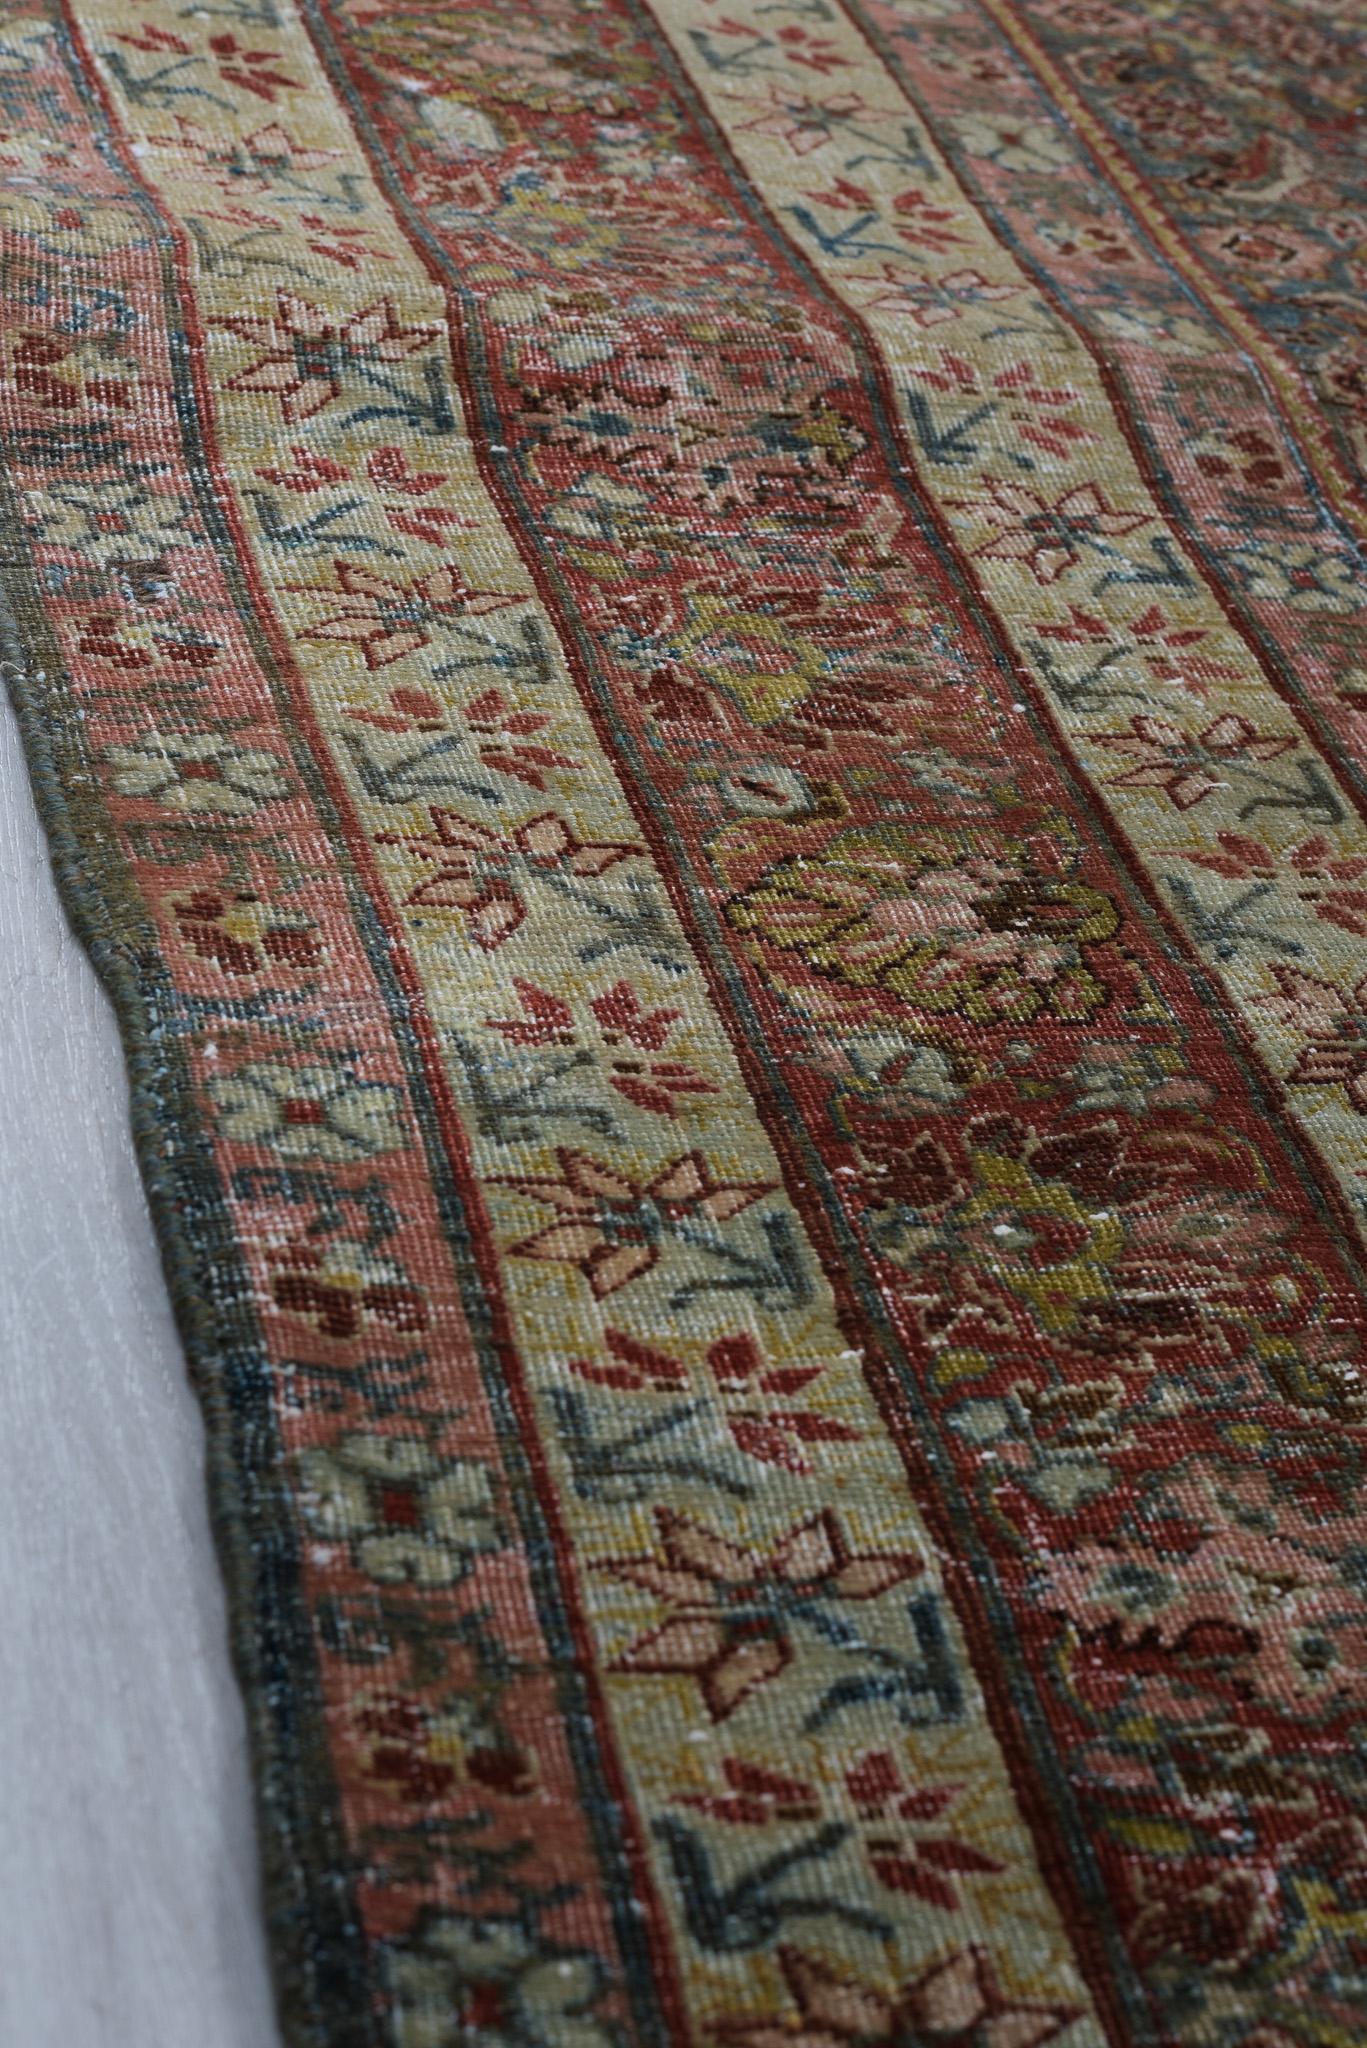 Antique Bidjar rugs are a type of handwoven carpet that originates from the region of Bidjar in Kurdistan, Iran. These rugs are highly renowned for their exceptional durability, unique designs, and luxurious feel, making them highly sought-after